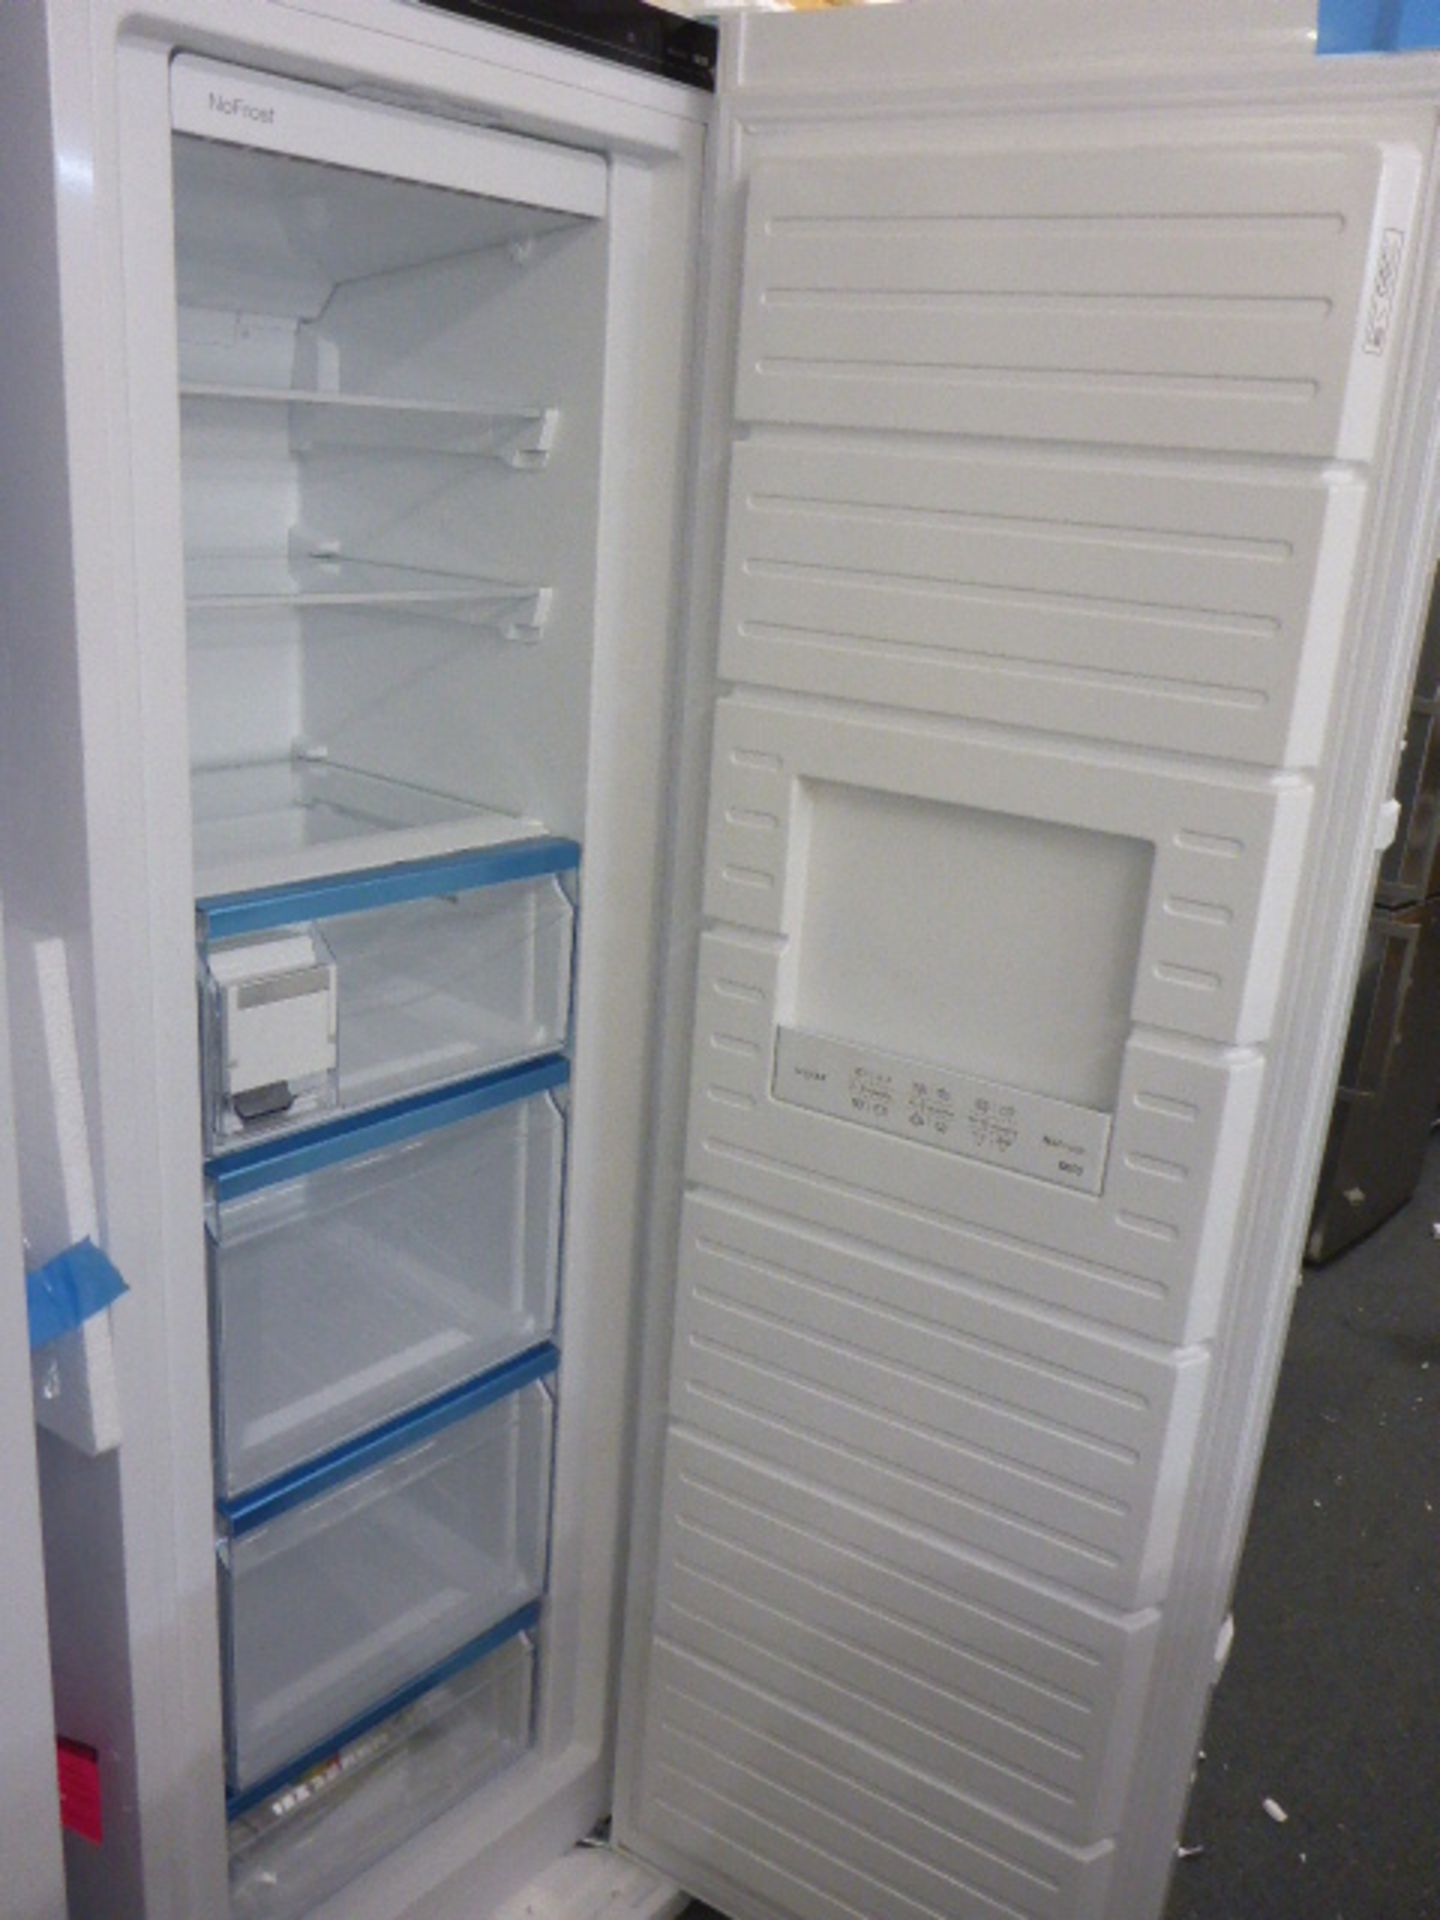 GSN36AW3PGB Bosch Free-standing upright freezer - Image 2 of 2